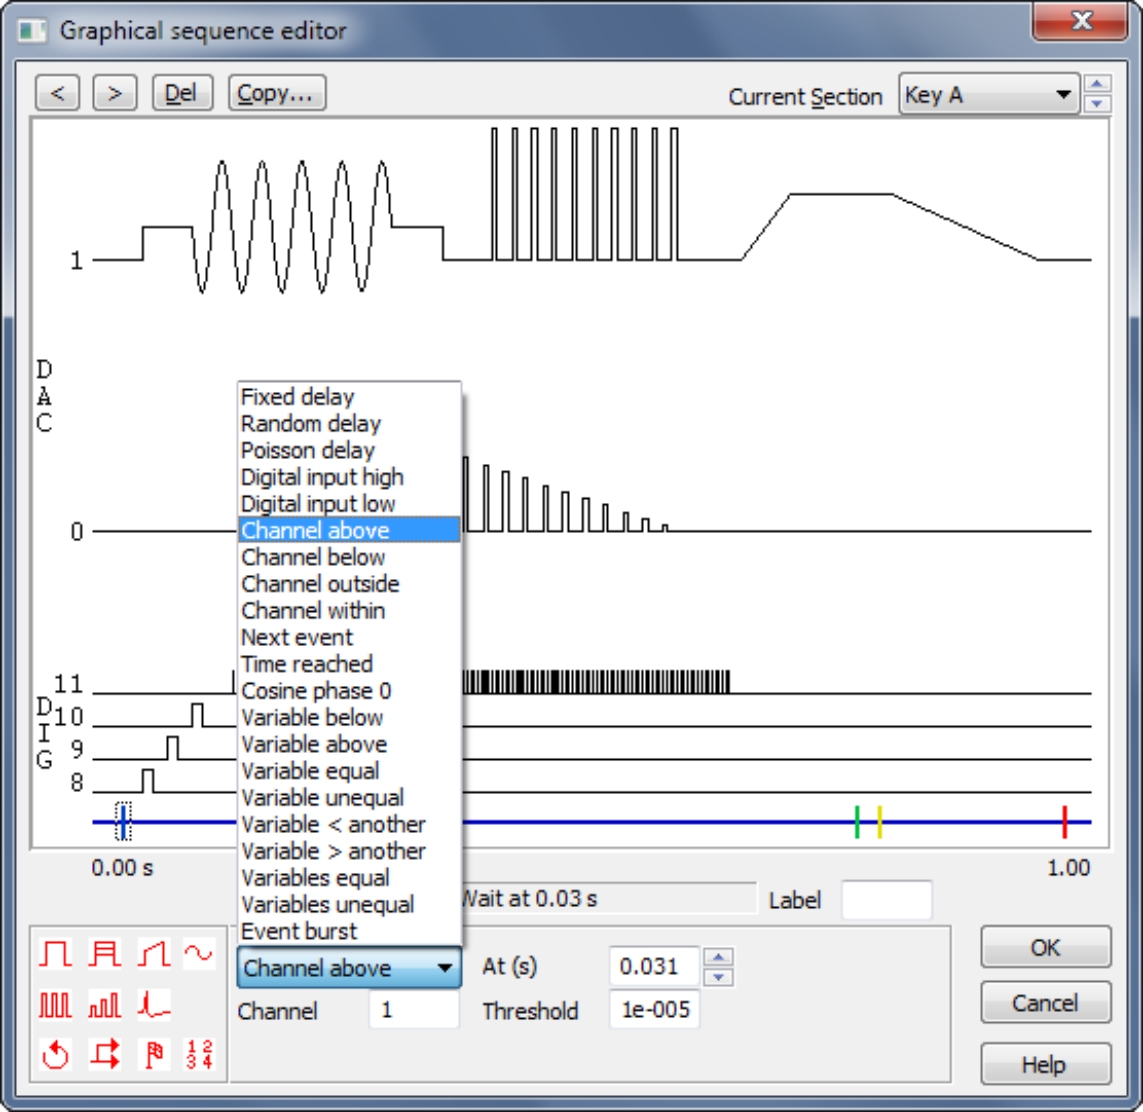 Spike2 graphical sequence editor showing different outputs and additional control options